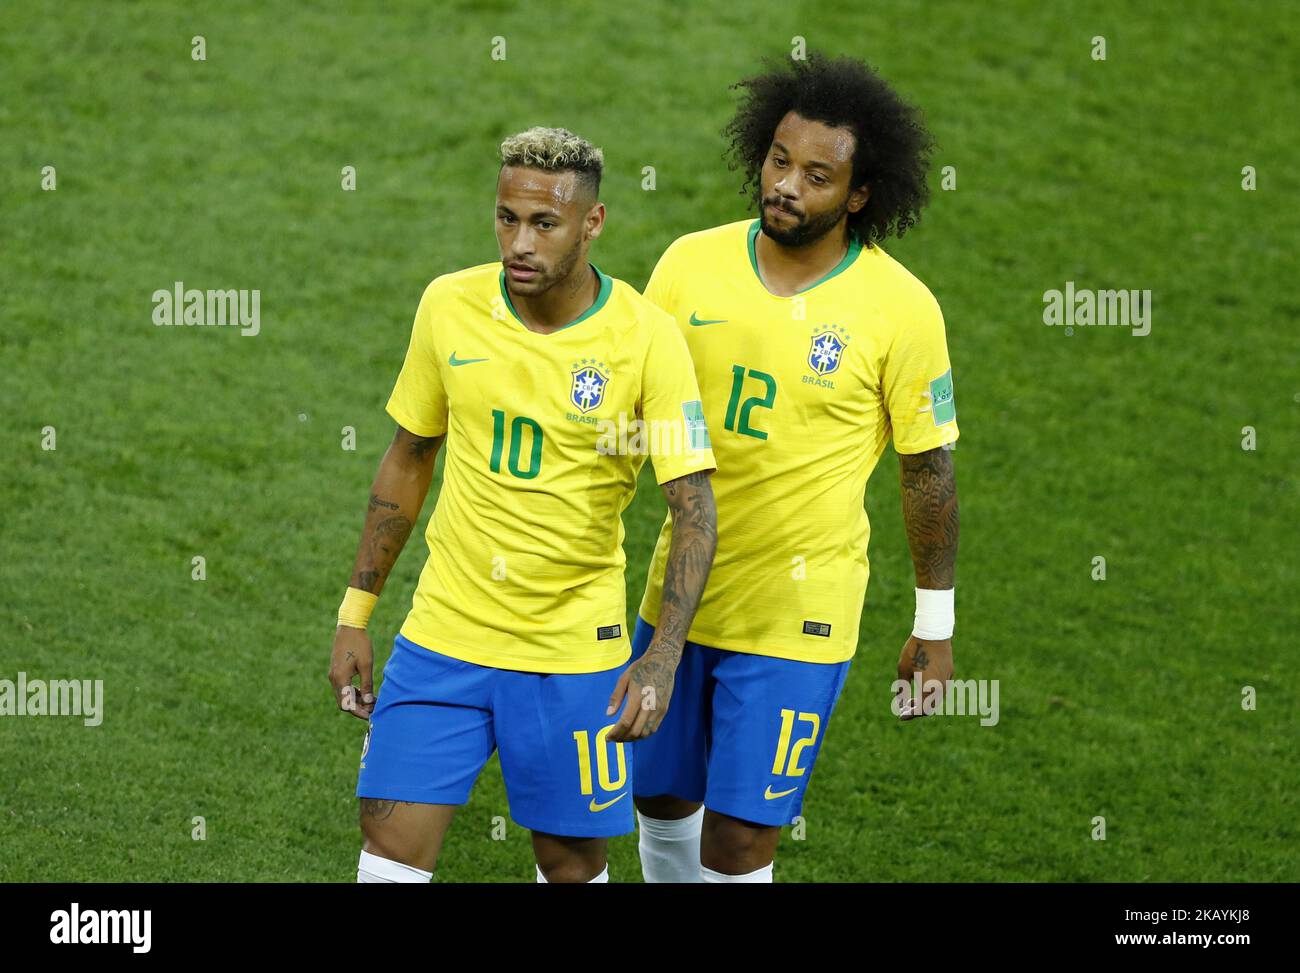 Group E Serbia v Brazil - FIFA World Cup Russia 2018 Neymar (Brazil) and Marcelo (Brazil) at Spartak Stadium in Moscow, Russia on June 27, 2018. (Photo by Matteo Ciambelli/NurPhoto)  Stock Photo